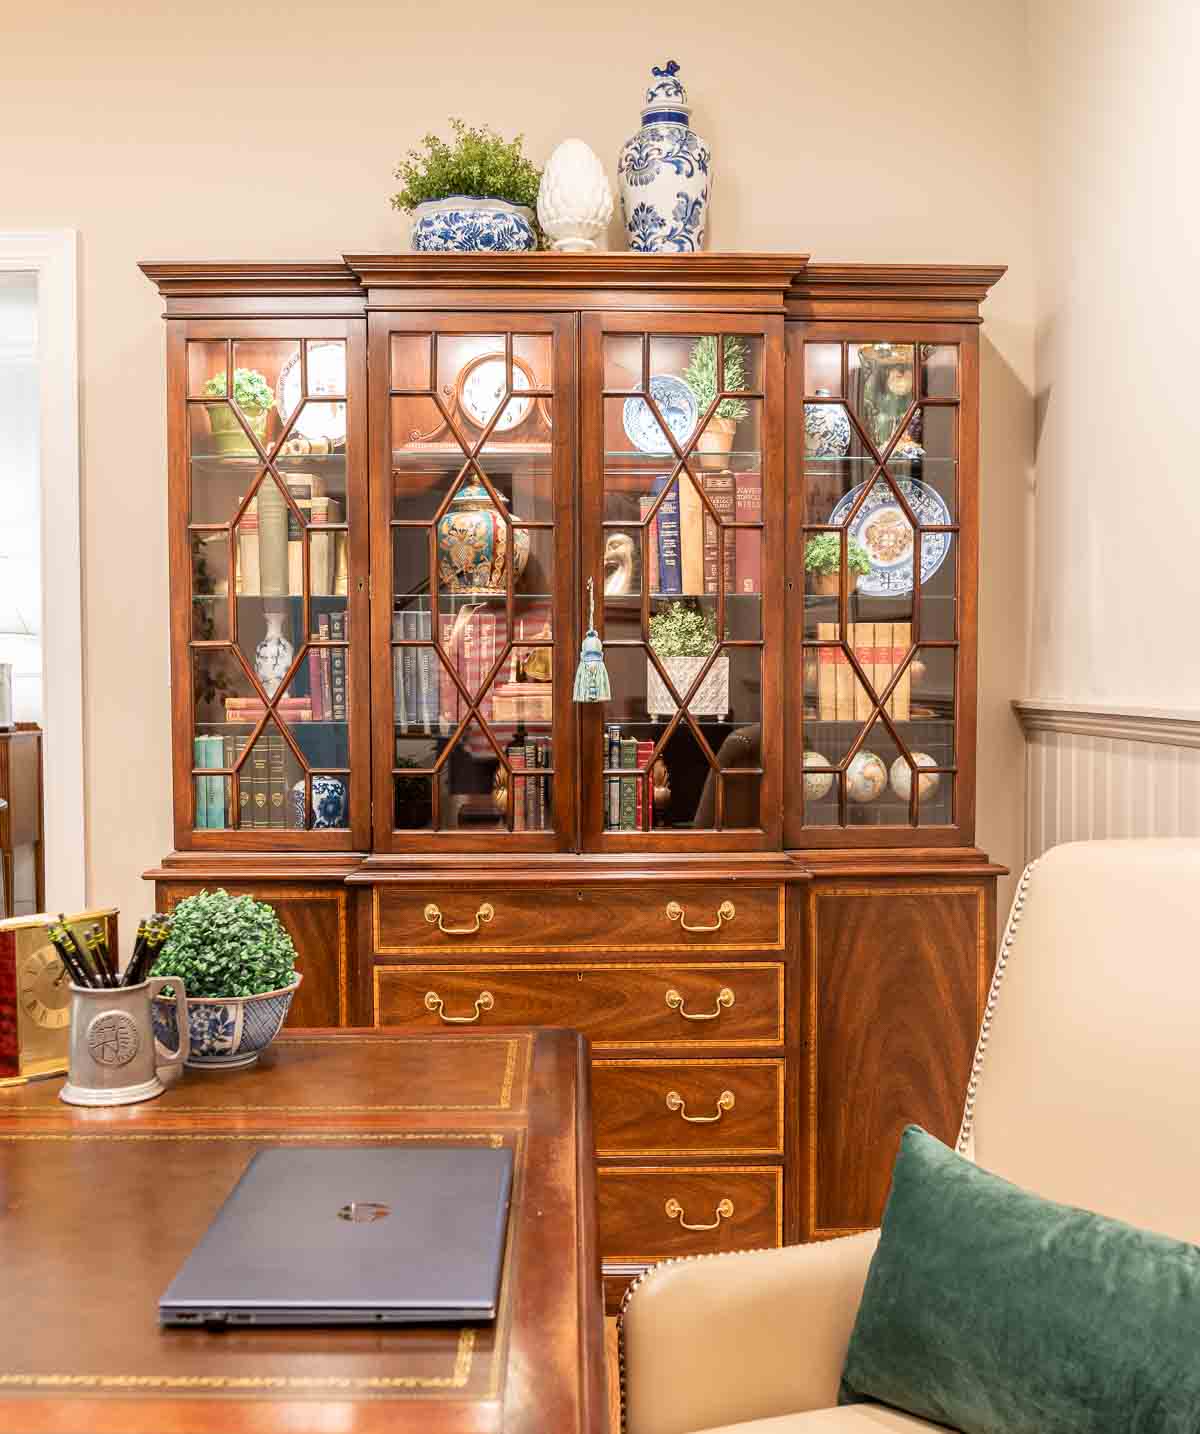 a traditional china hutch in a home office filled with traditional decorative objects and books